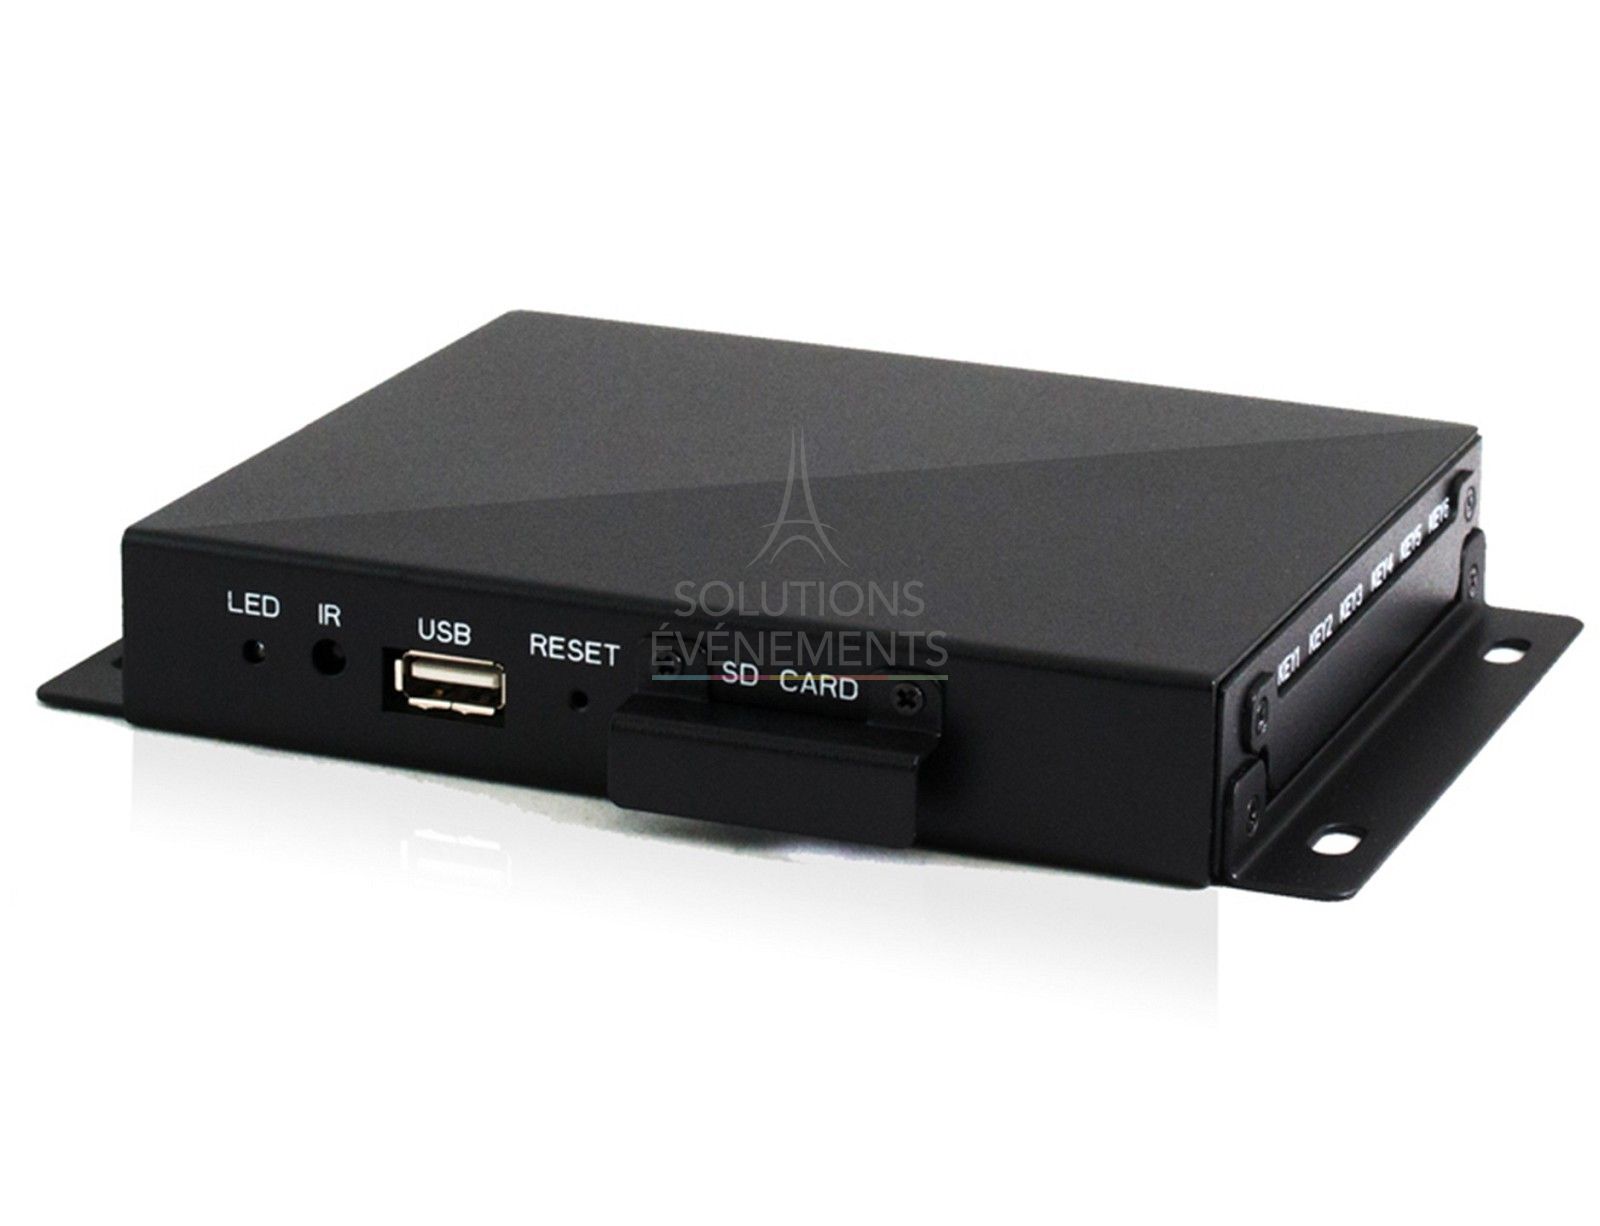 Rental of an EBE-GS-P002 media player allowing the broadcasting of videos on screens